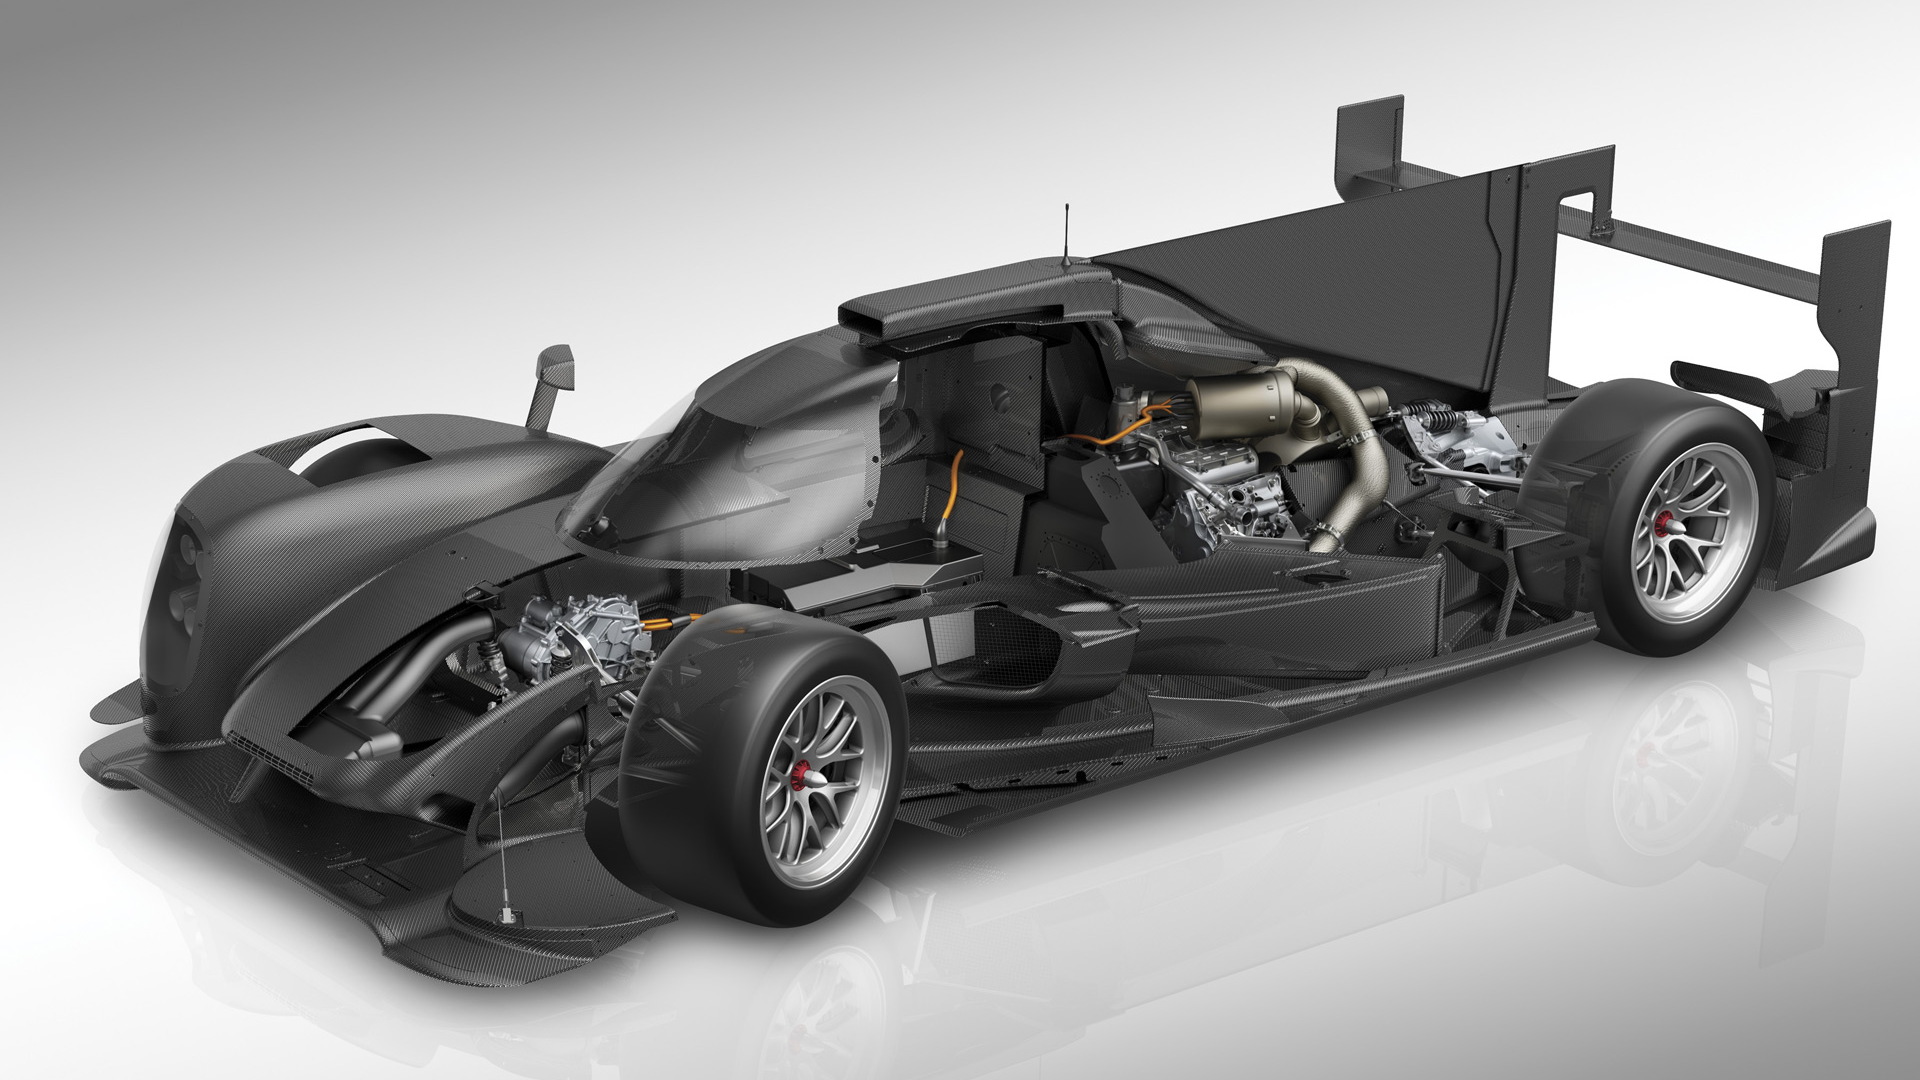 Porsche 919 Hybrid LMP1 race car’s electric energy recovery and drive system